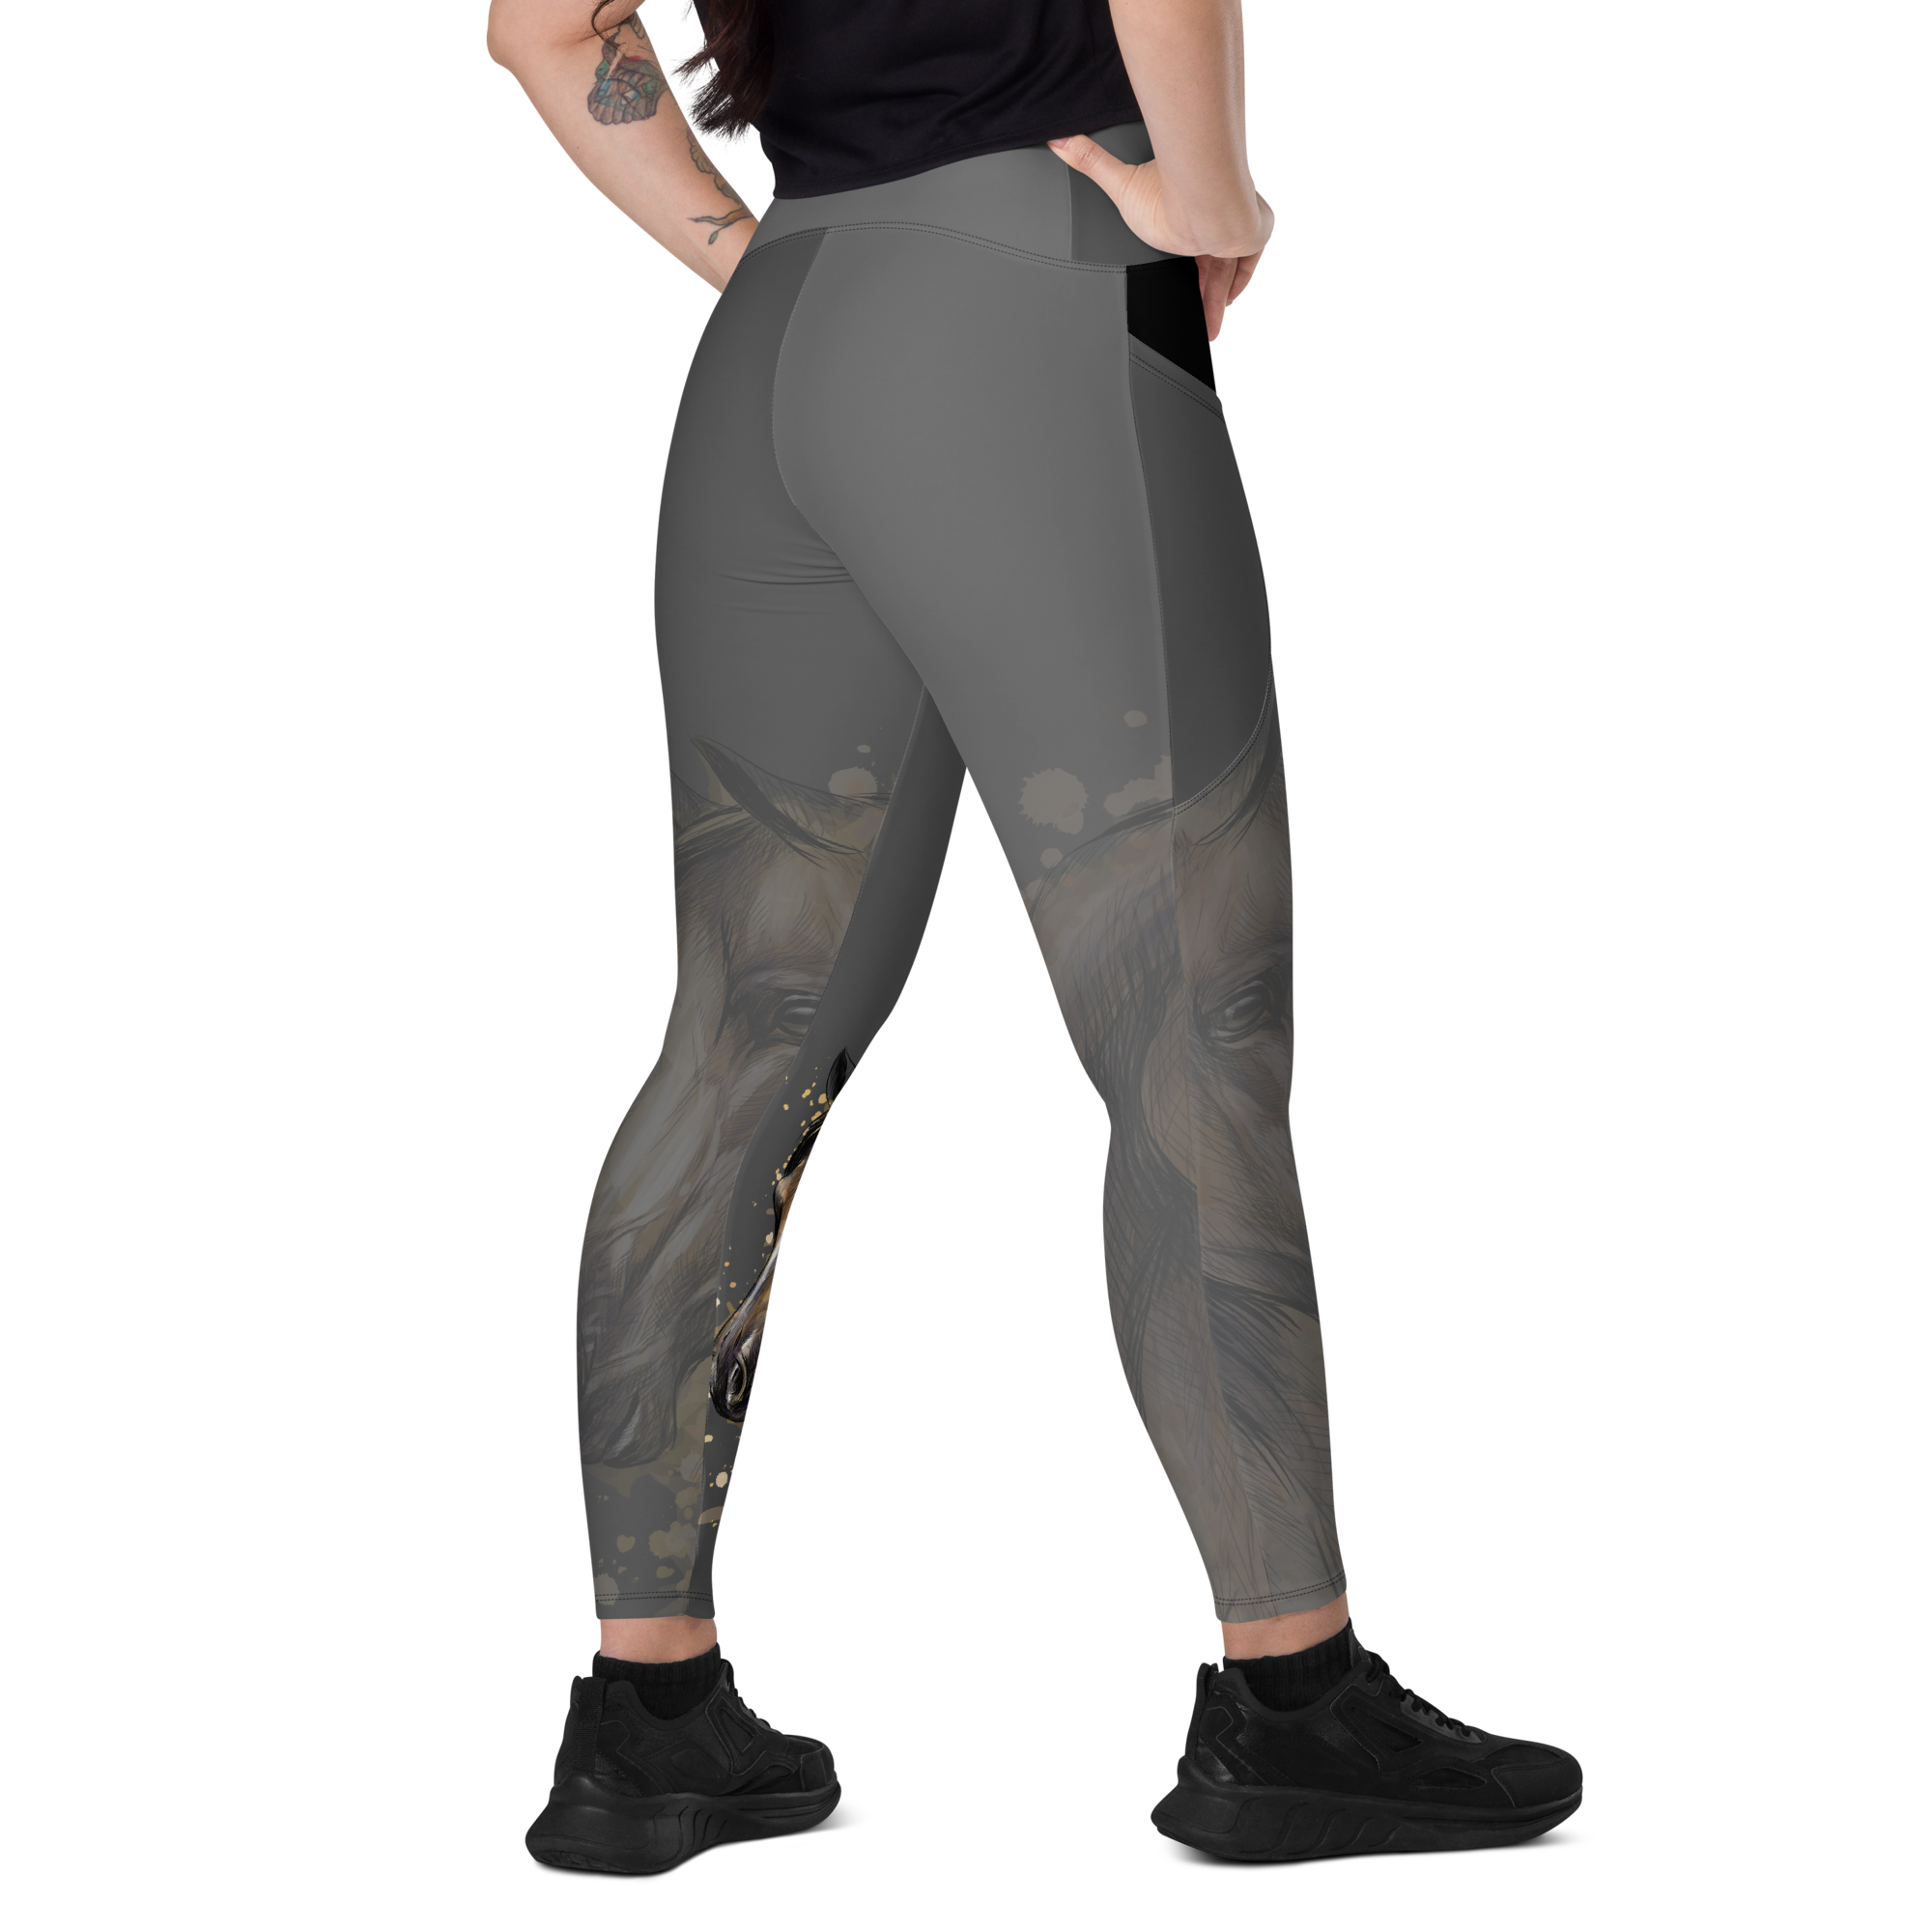 Grey Horse Silhouette Leggings with pockets